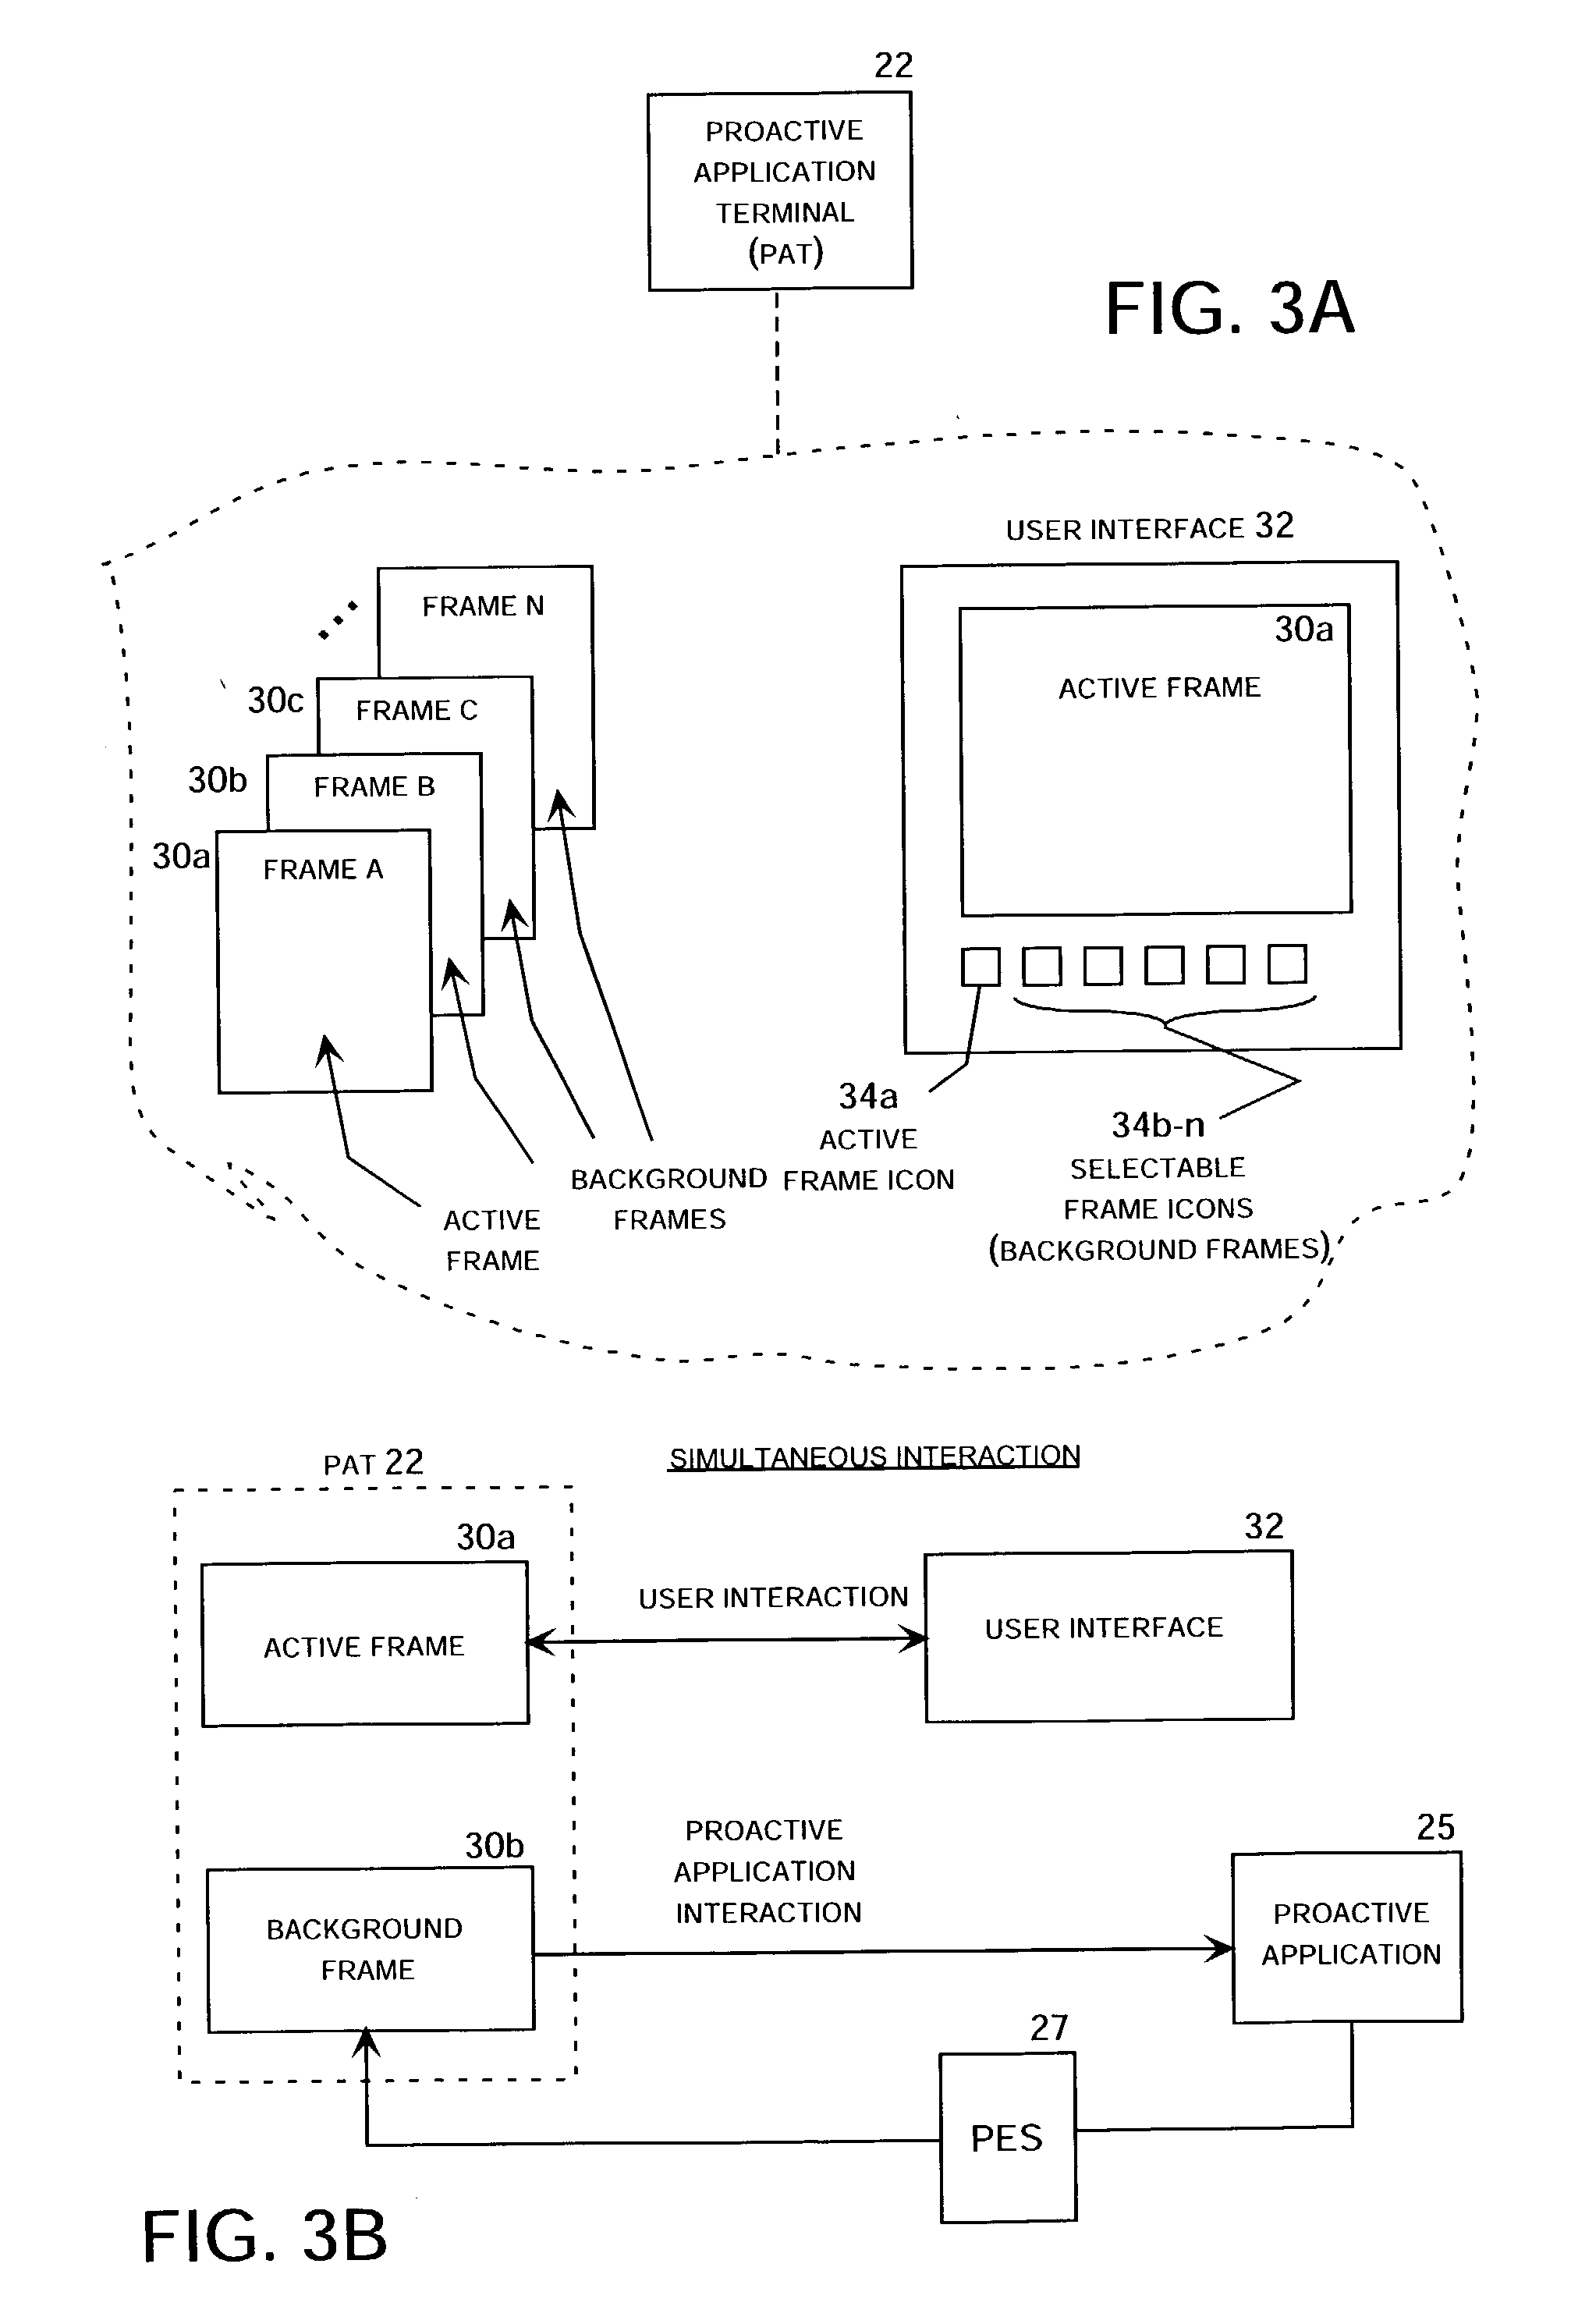 Method for a proactive browser system for implementing background frame maintenance and asynchronous frame submissions